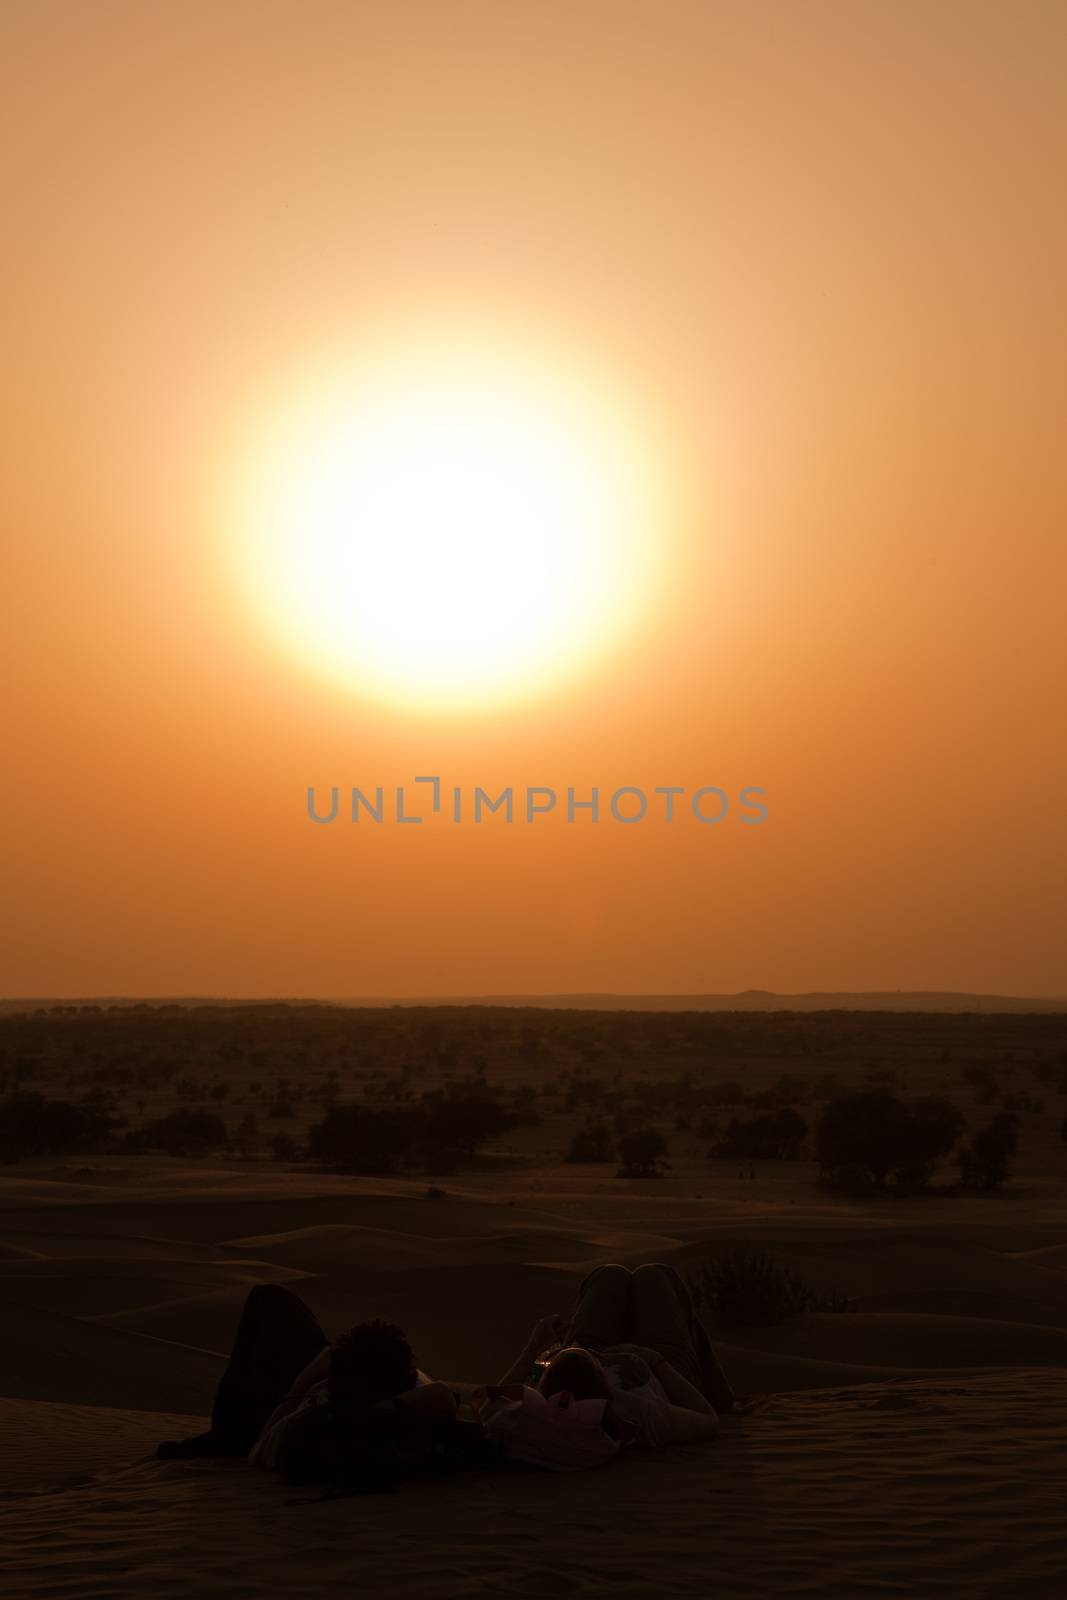 romantic couple looking at the sunset at khuri dunes in thar desert near jaisalmer in rajasthan state in india